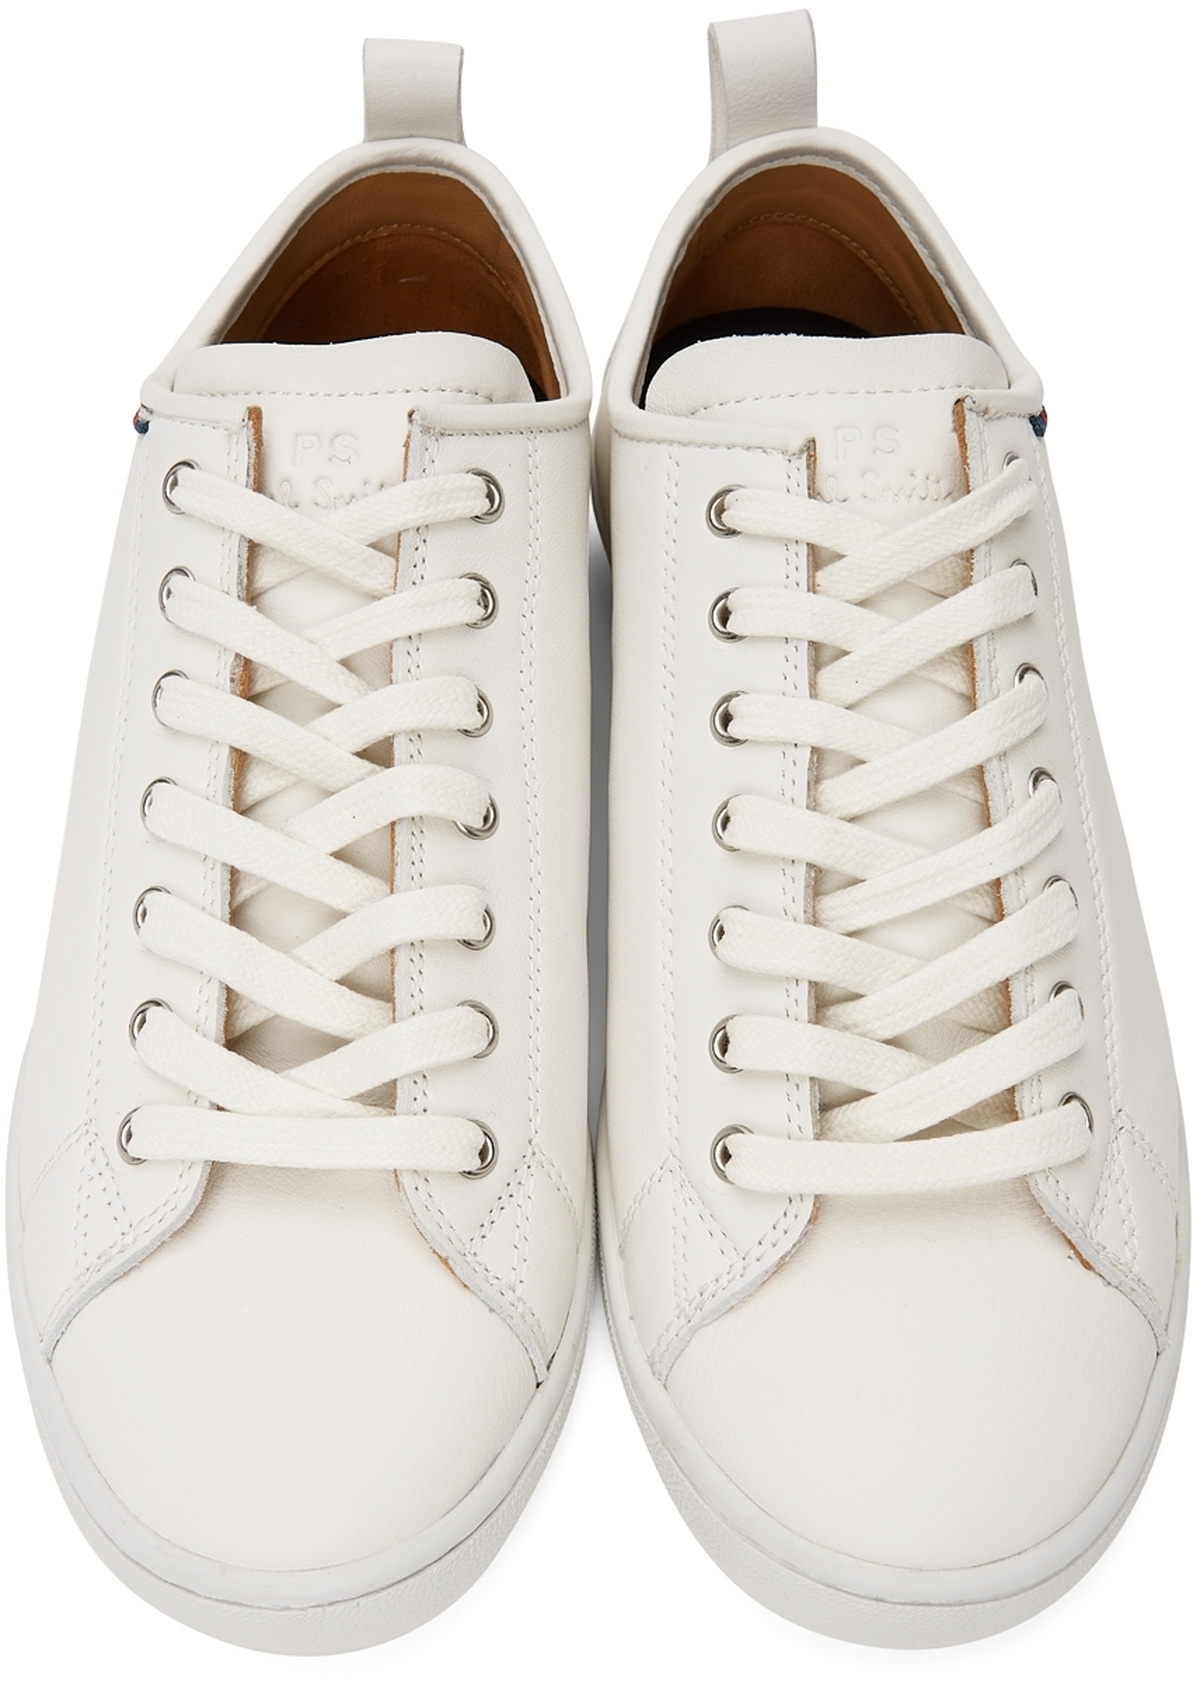 PS by Paul Smith White Miyata Sneakers PS by Paul Smith